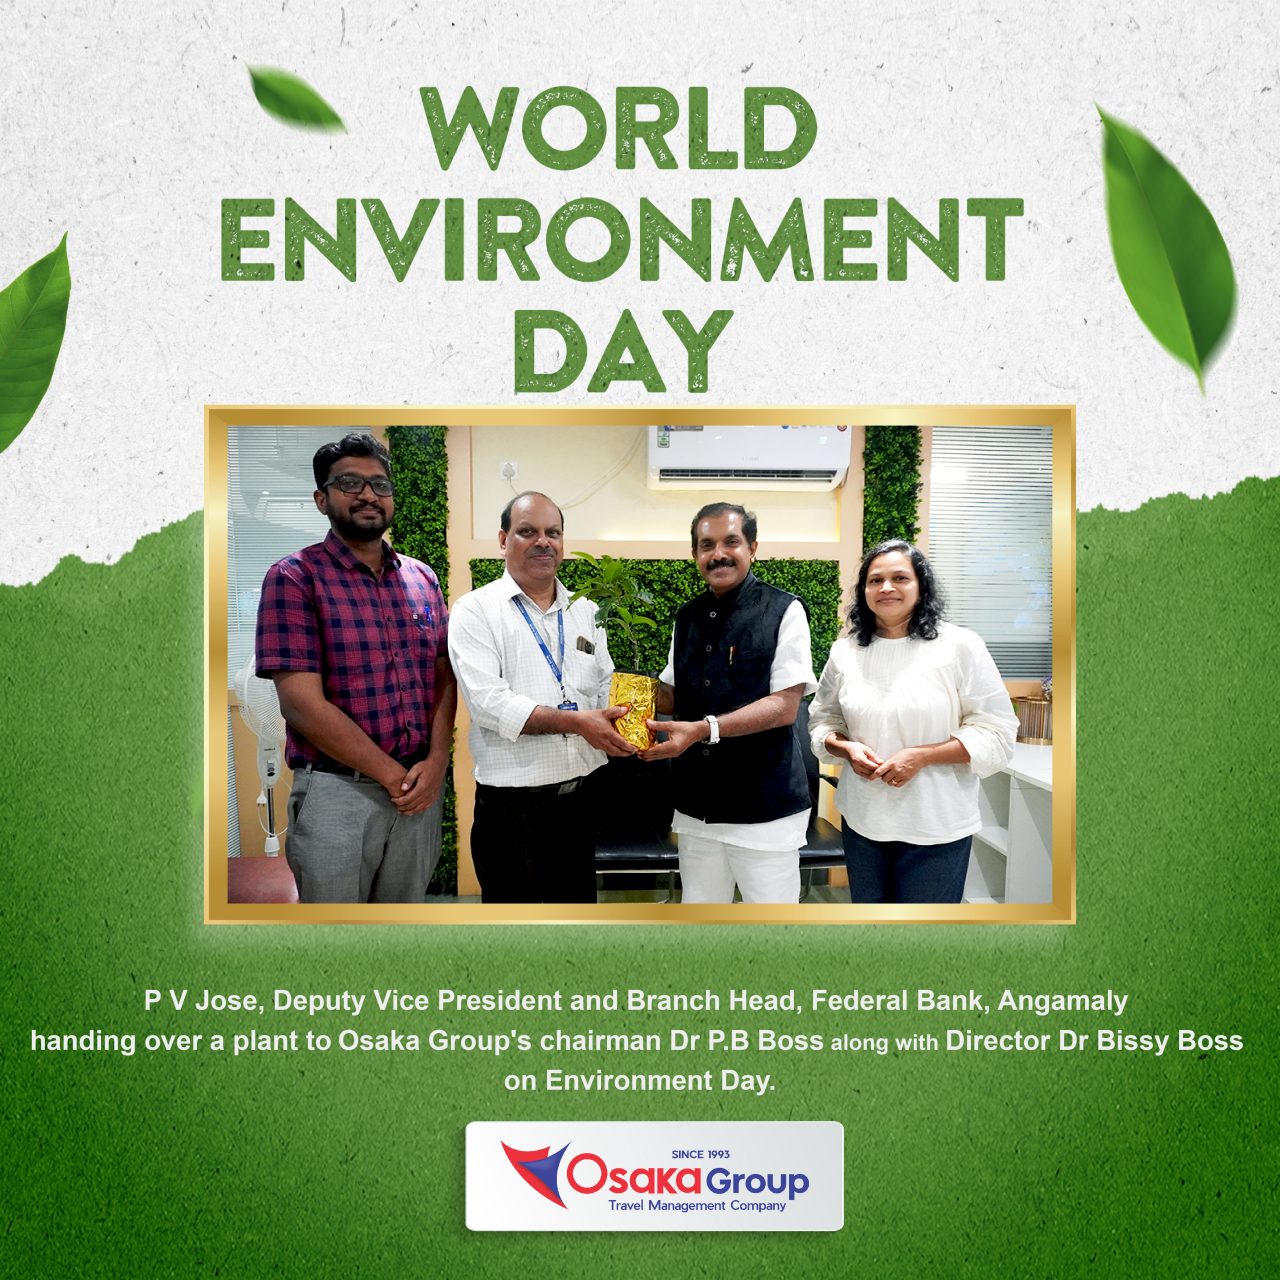 world environment day, June 5th